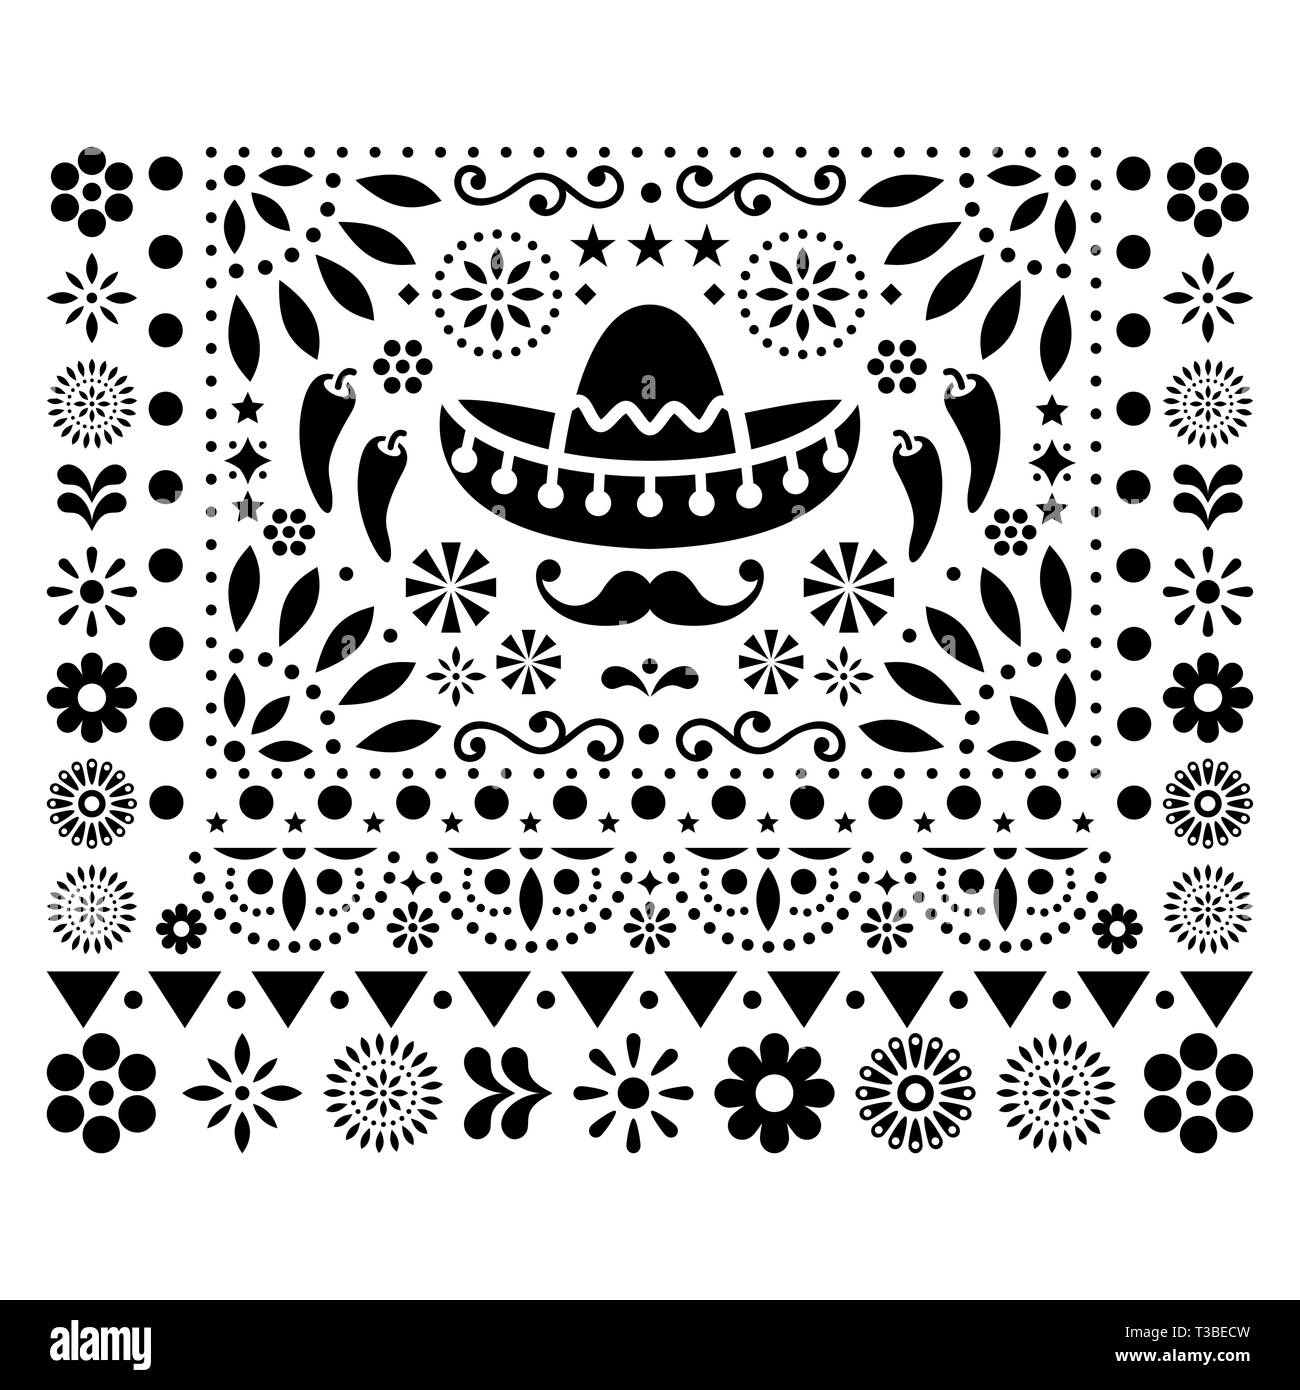 Mexican vector floral design with sombrero, chili peppers and flowers, happy ornament - greeting card on invitation pattern in black and white Stock Vector